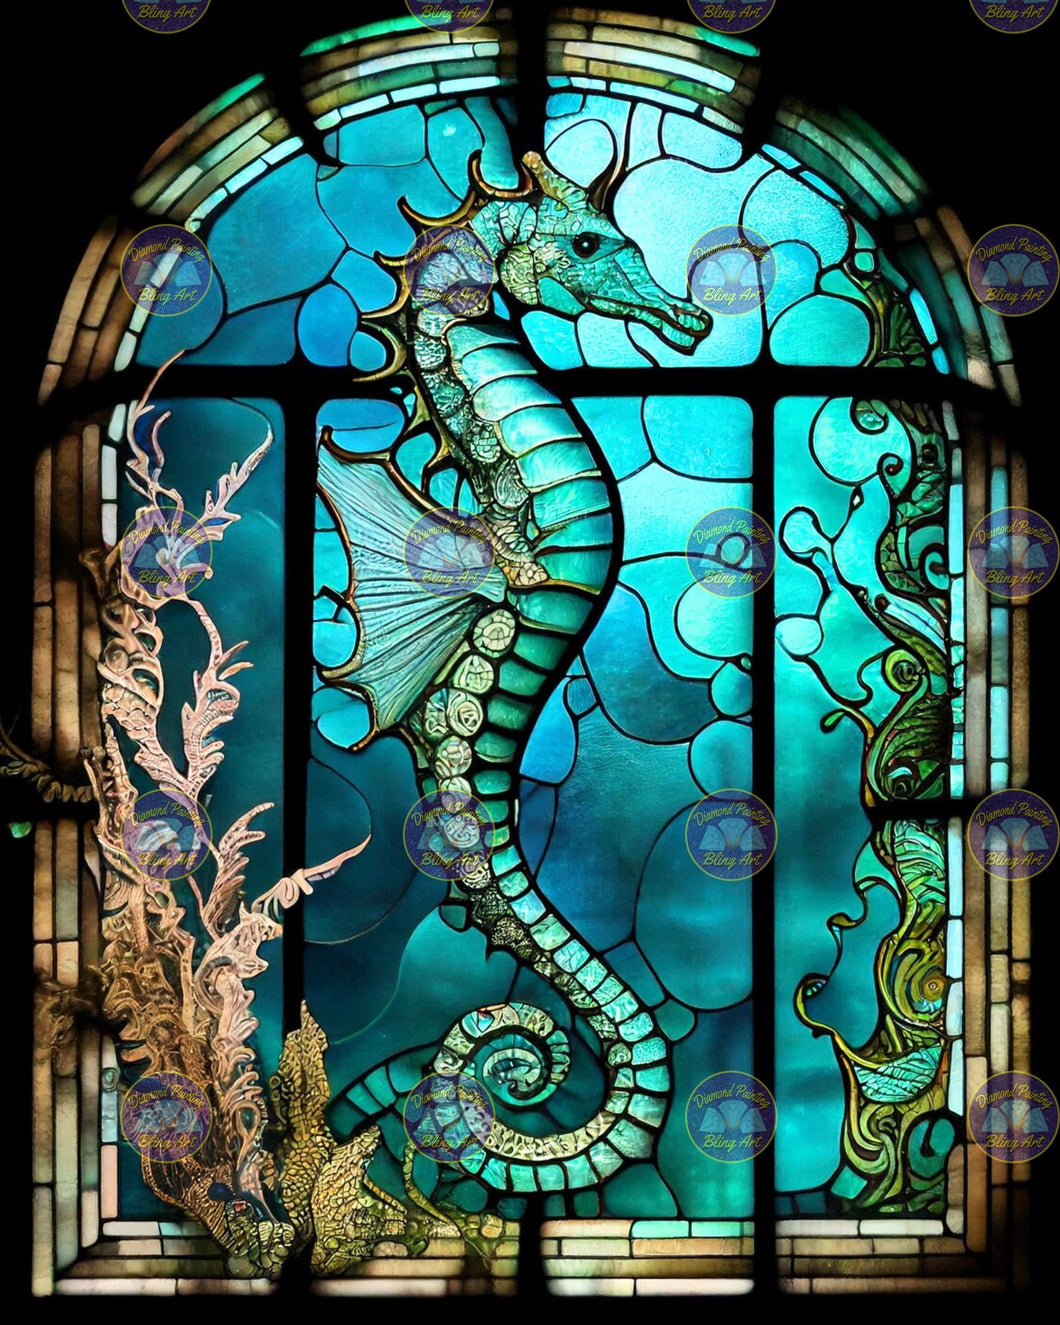  5D Diamond Painting Kits Seahorse Stained Glass DIY